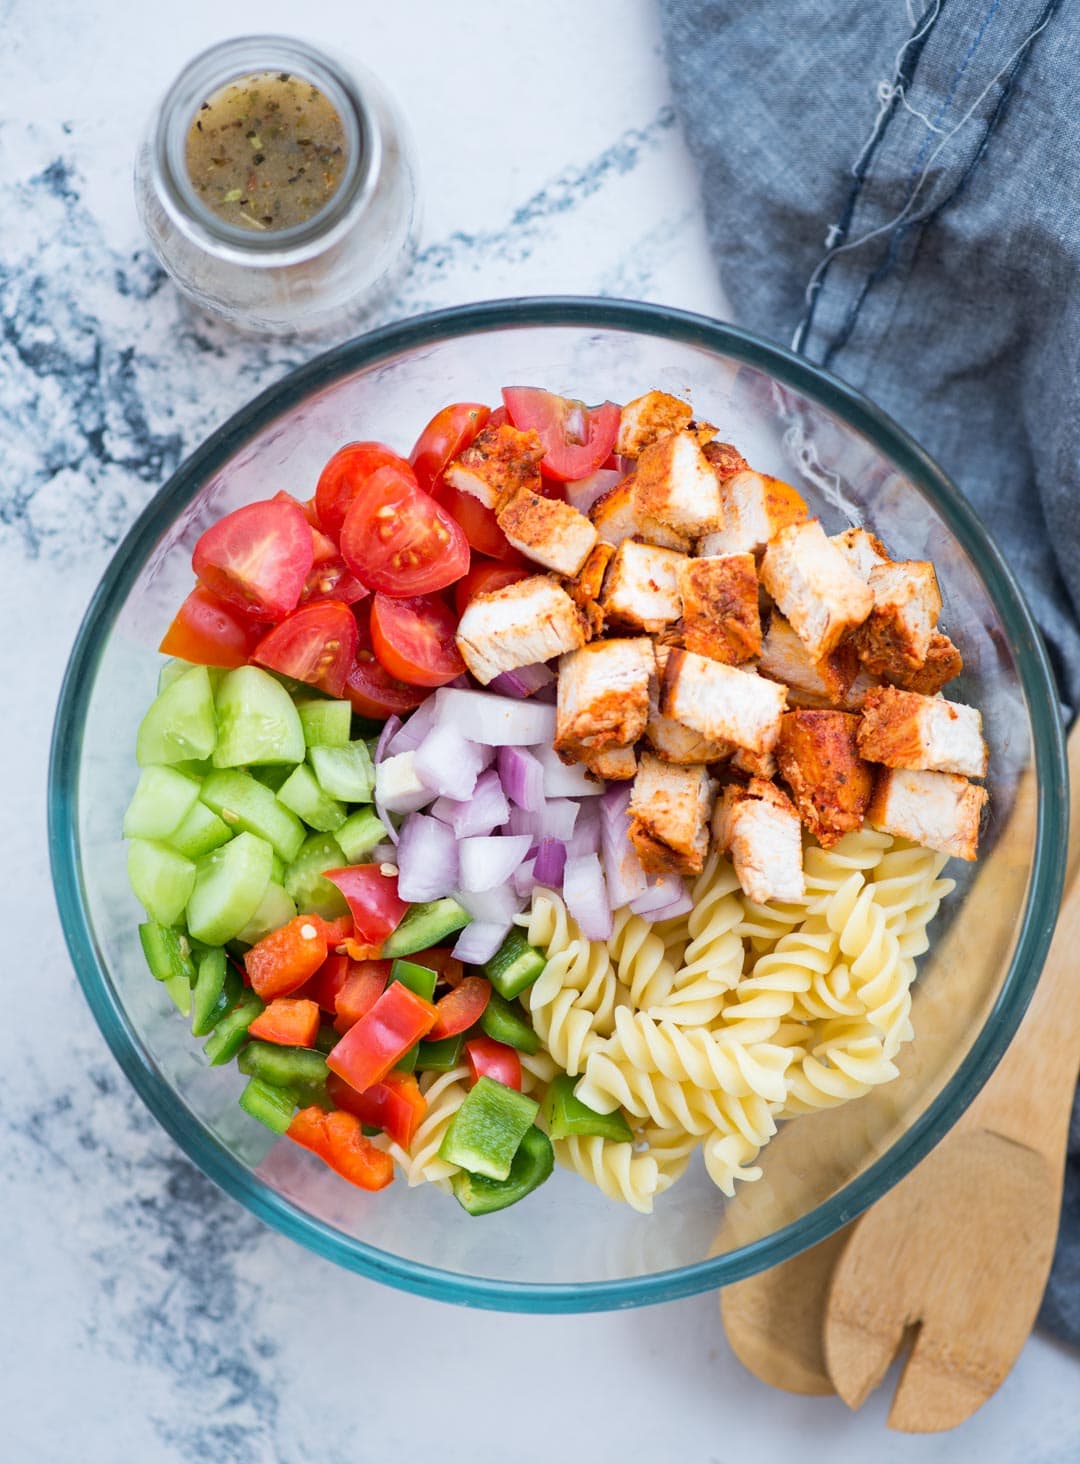 Ingredients for chicken pasta salad -  Grilled Chicken, Pasta and veggies tossed along with refreshing Lemon Herb Dressing